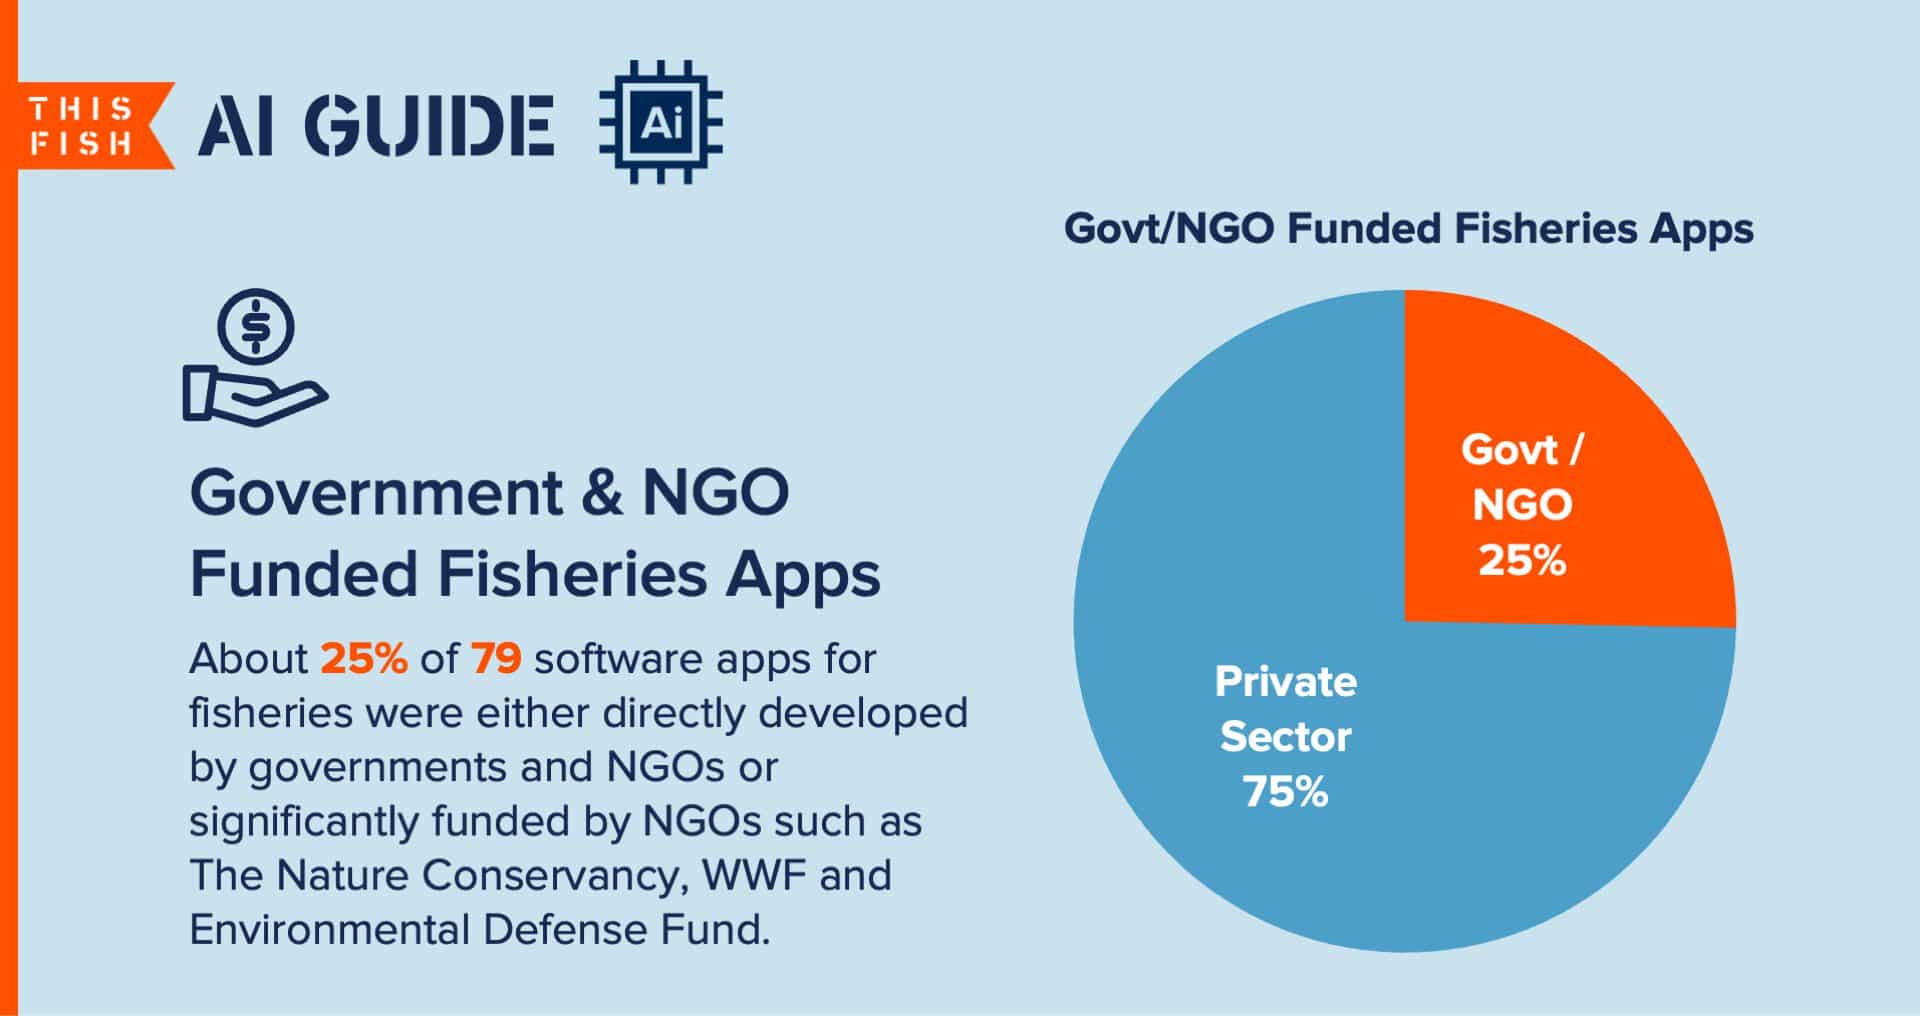 Pie chart showing distribution between private and NGO funding for seafood traceability providers.